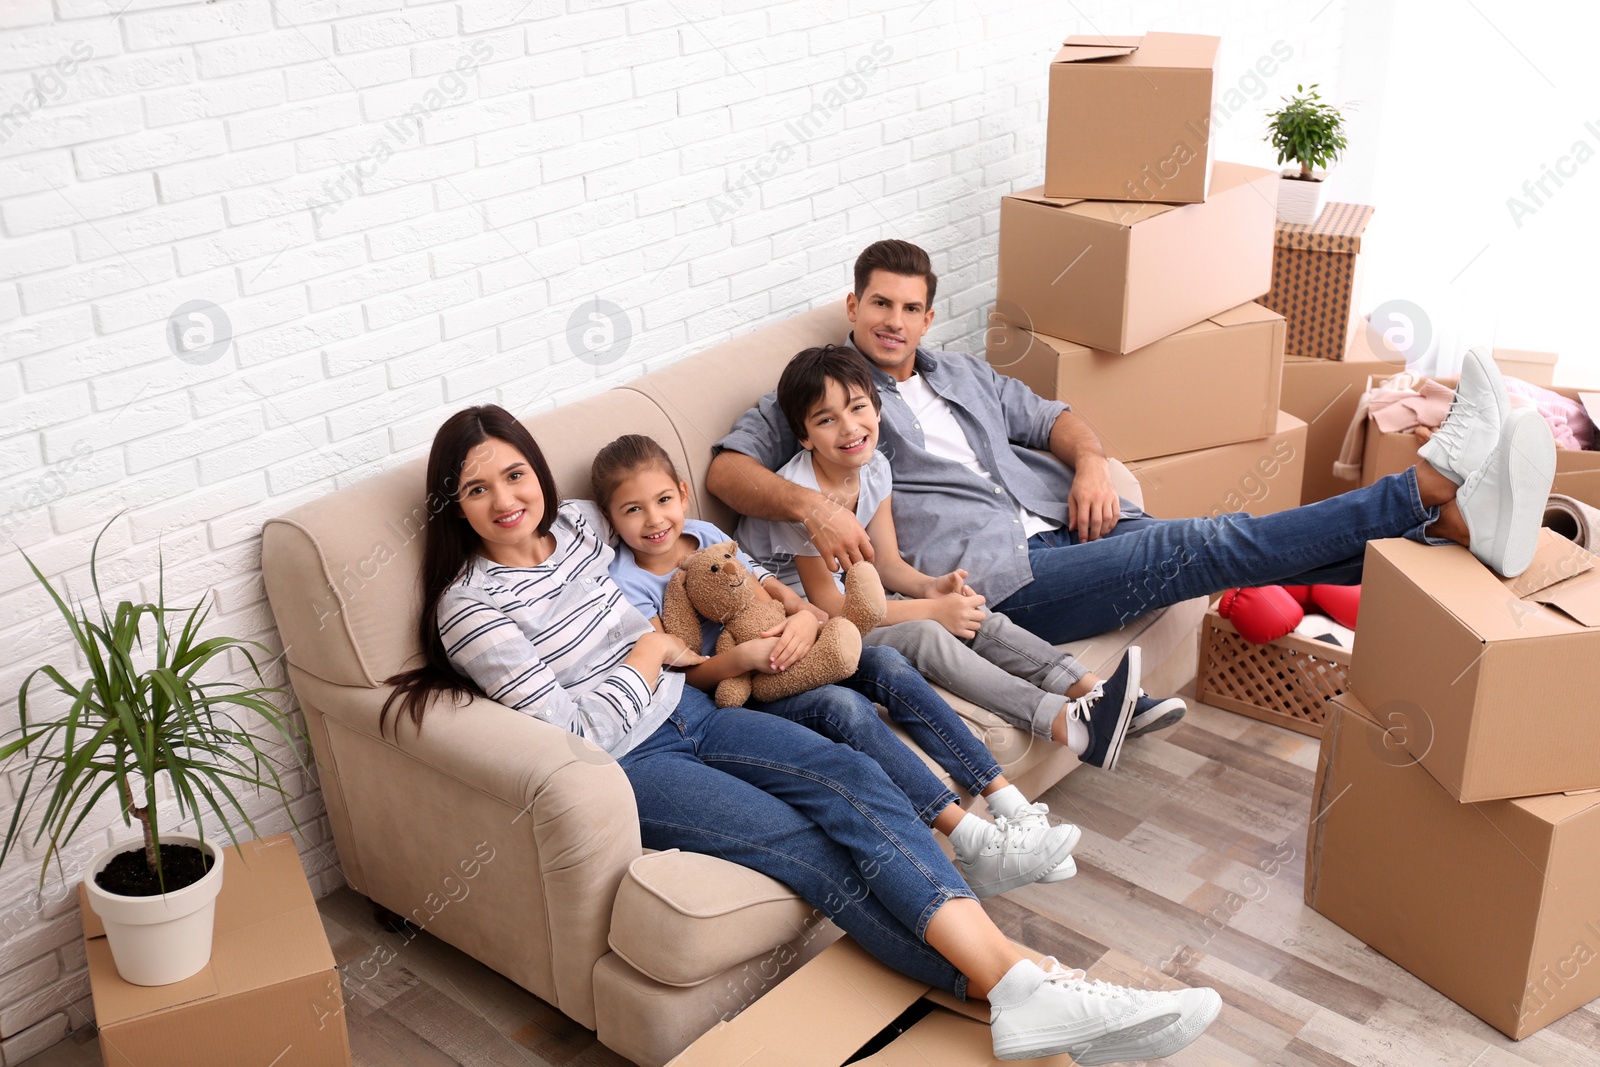 Photo of Happy family resting in room with cardboard boxes on moving day